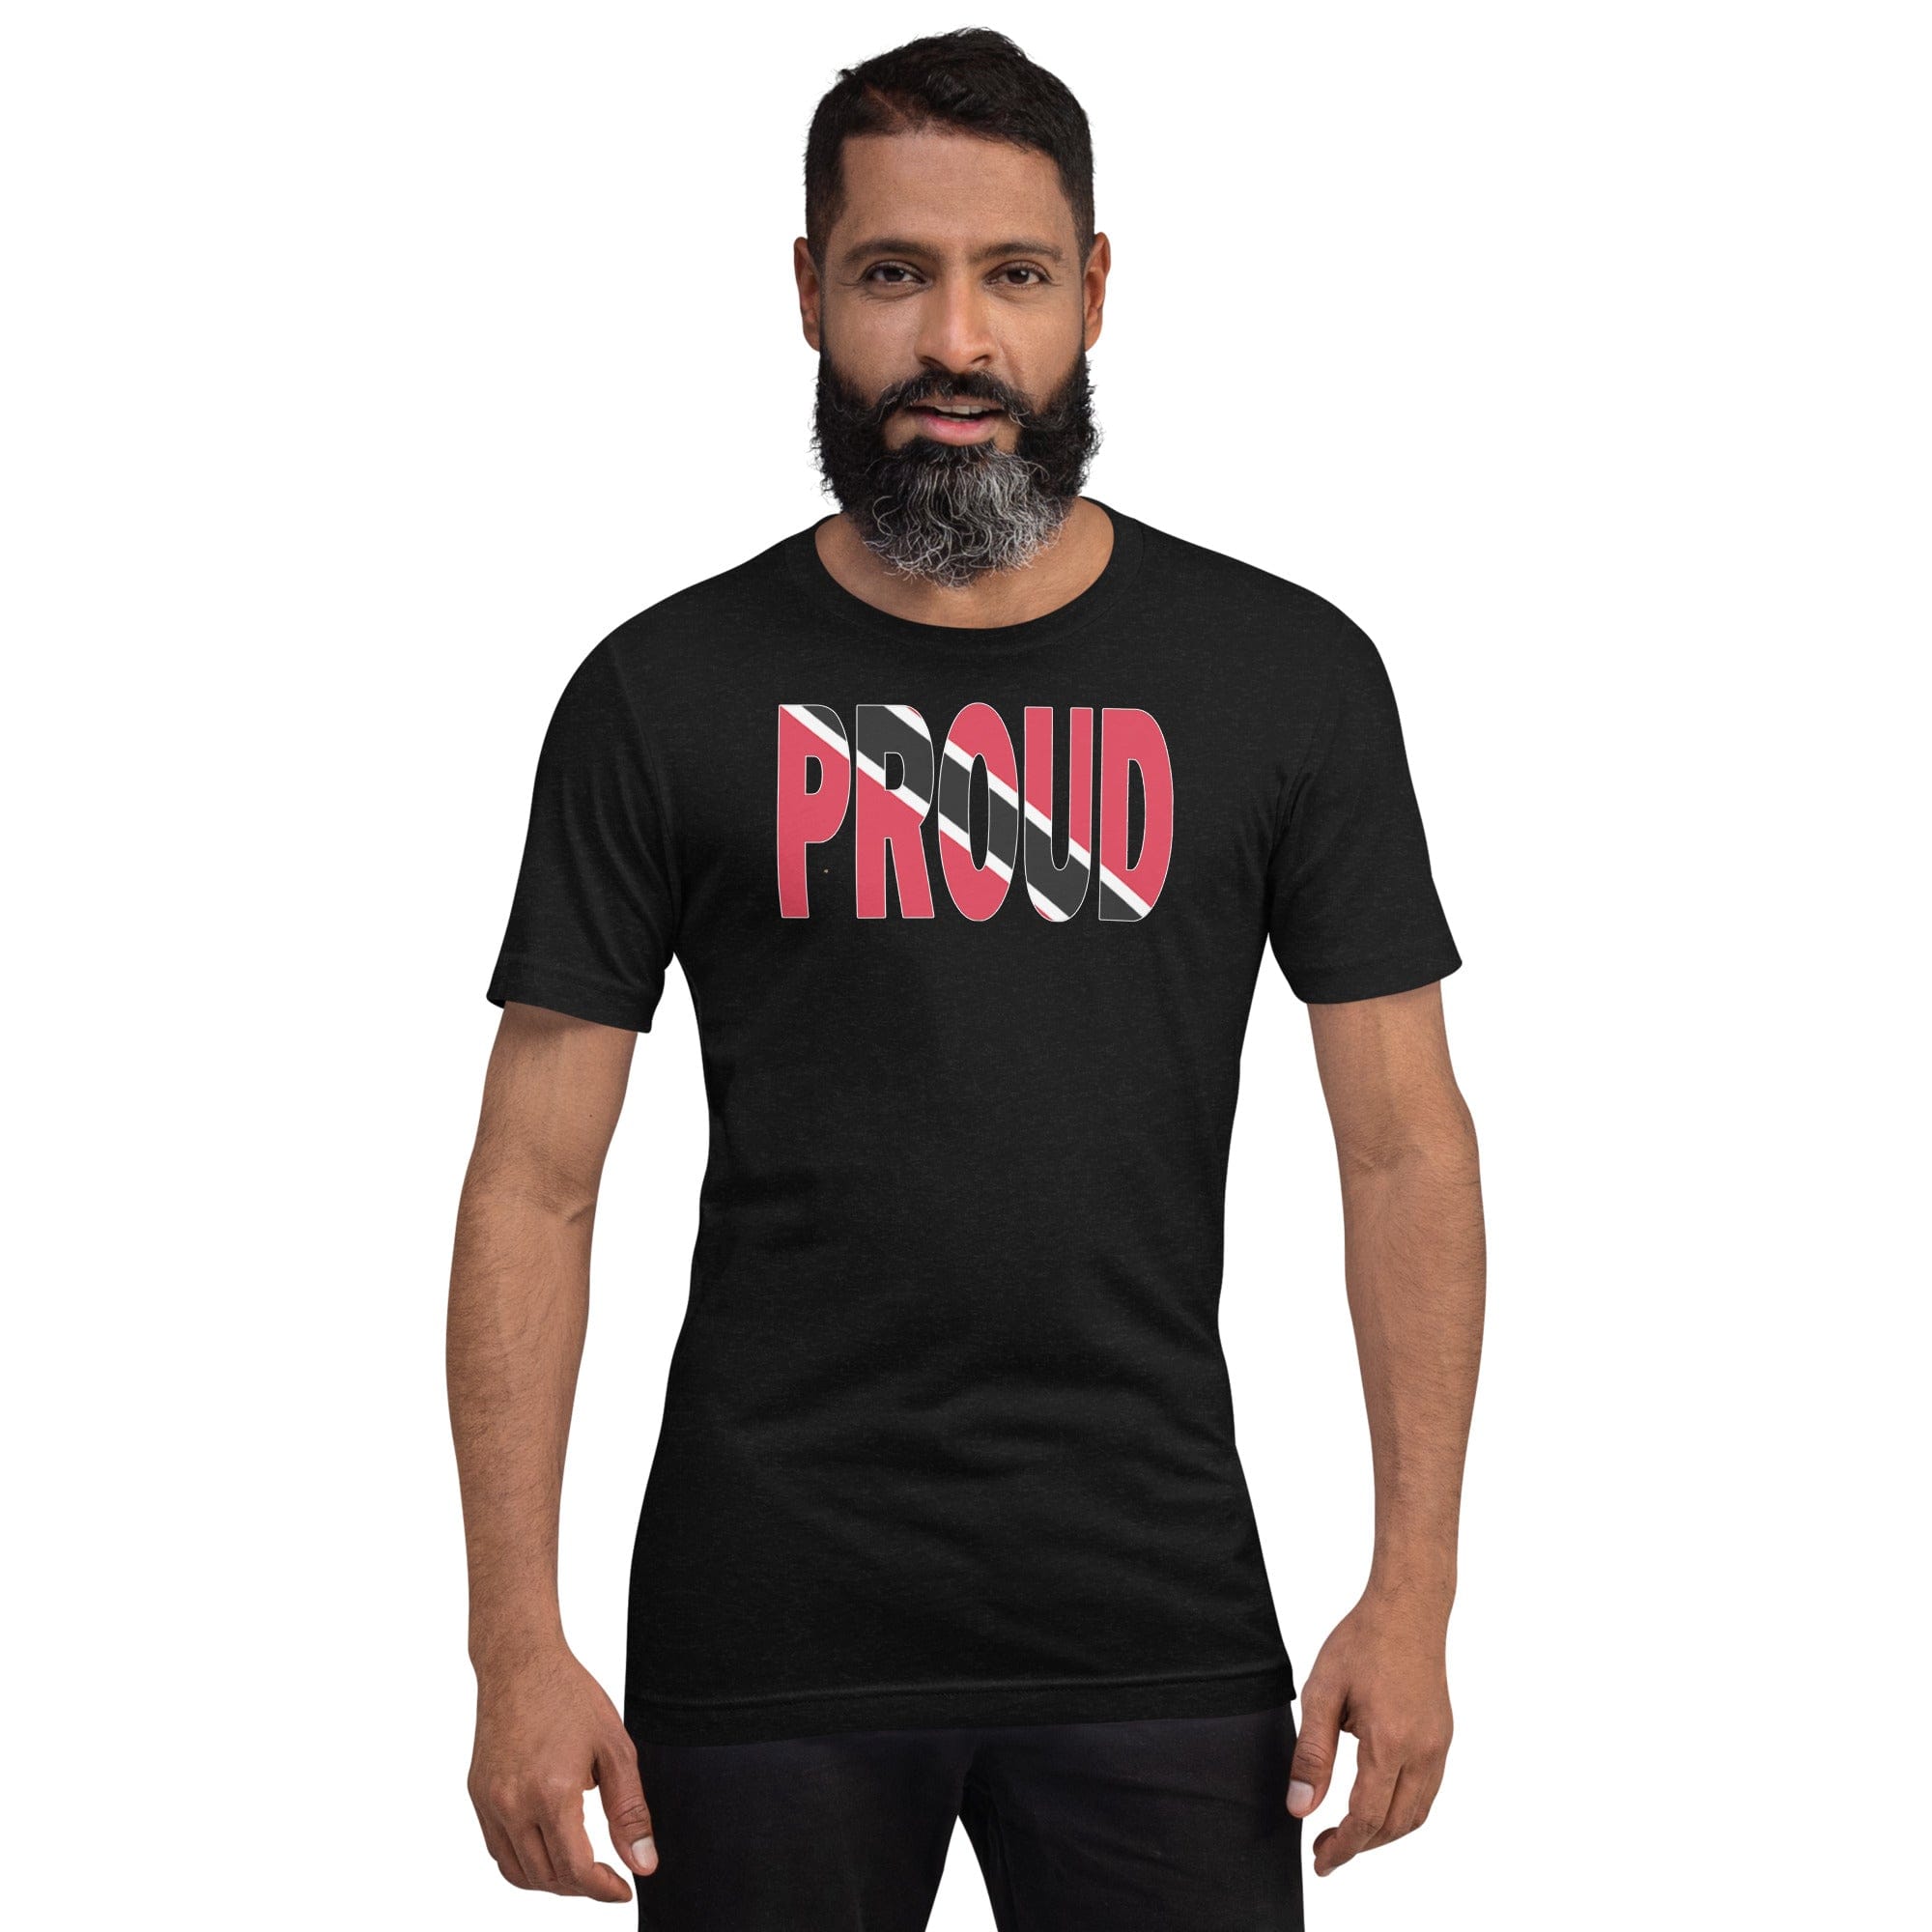  Trinidad Flag designed to spell Proud on a black color t-shirt worn by a black man.